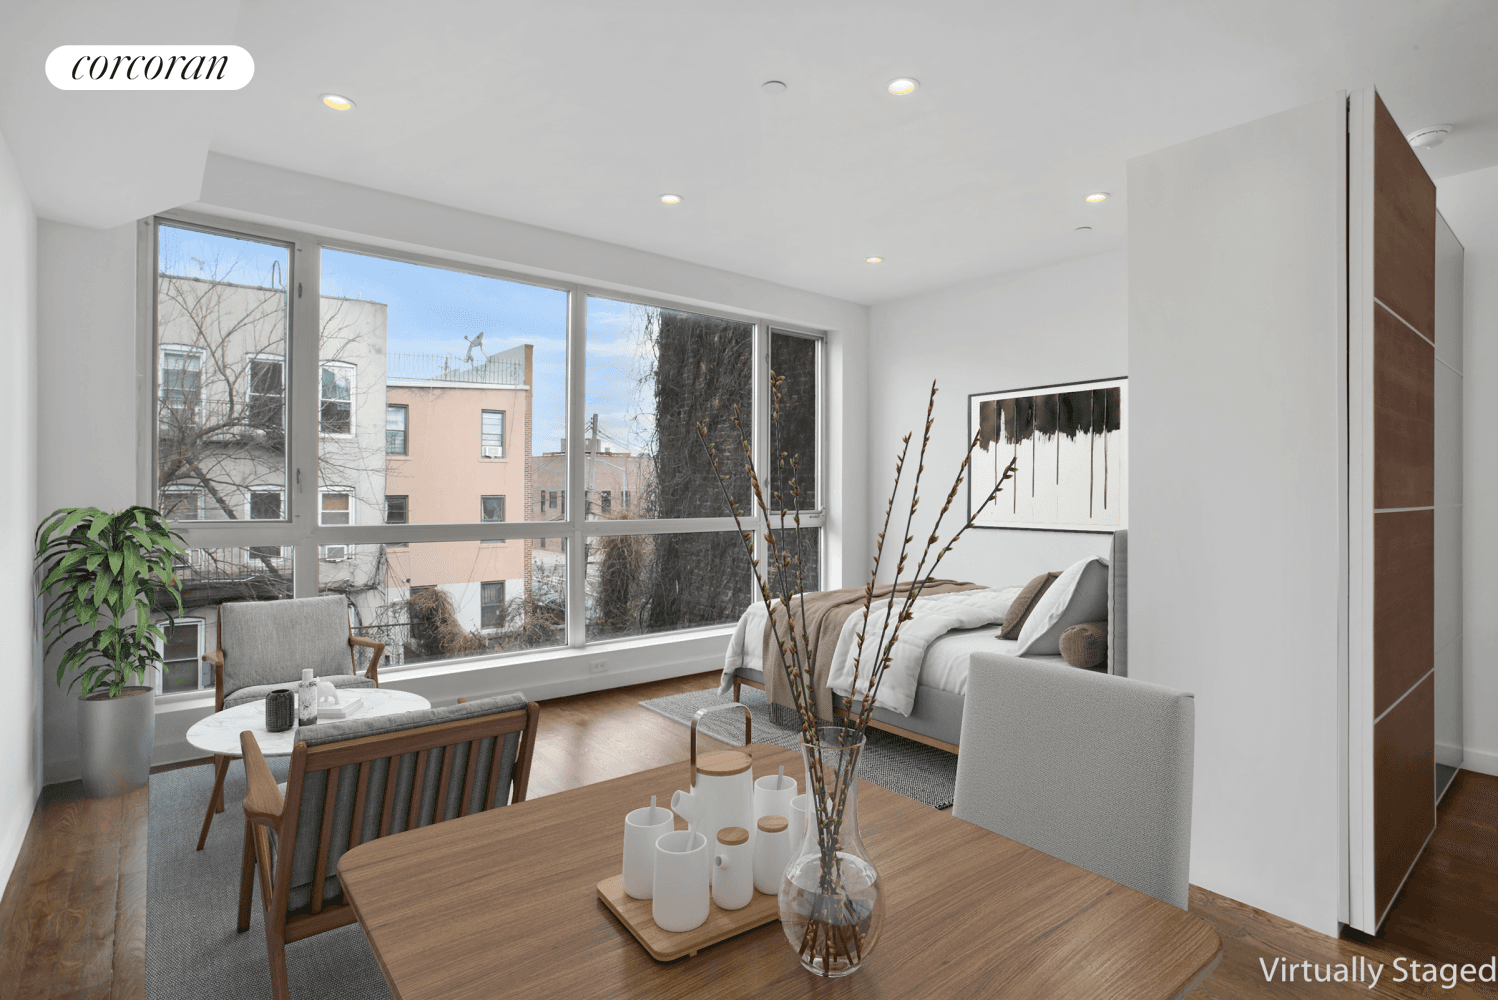 Welcome to the 18th Ward Condo complex, this is a stunning studio apartment situated on the 3rd floor in a 4 unit building.